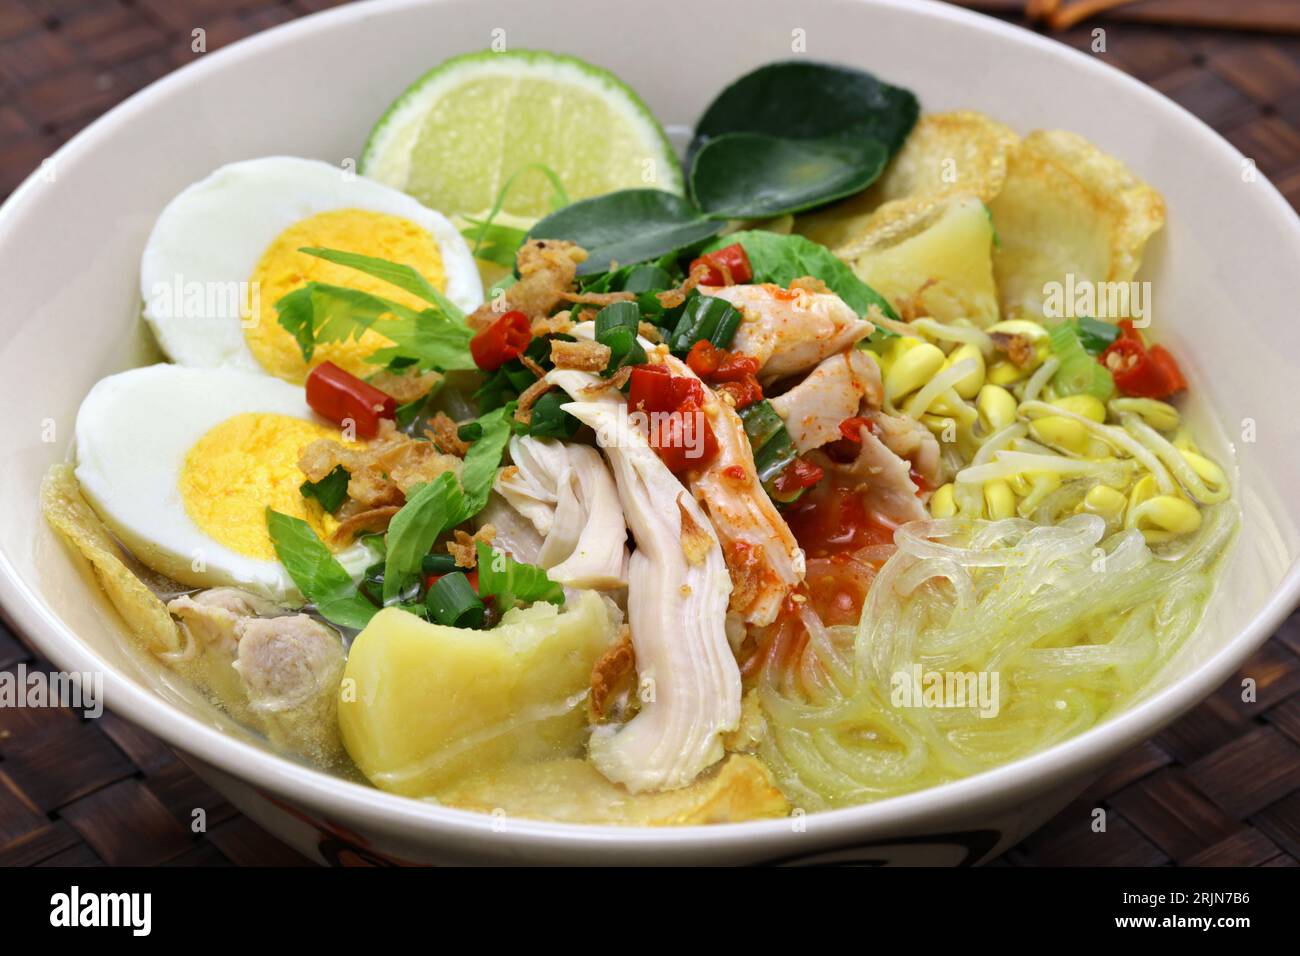 Soto Ayam, an Indonesian chicken noodle soup Stock Photo